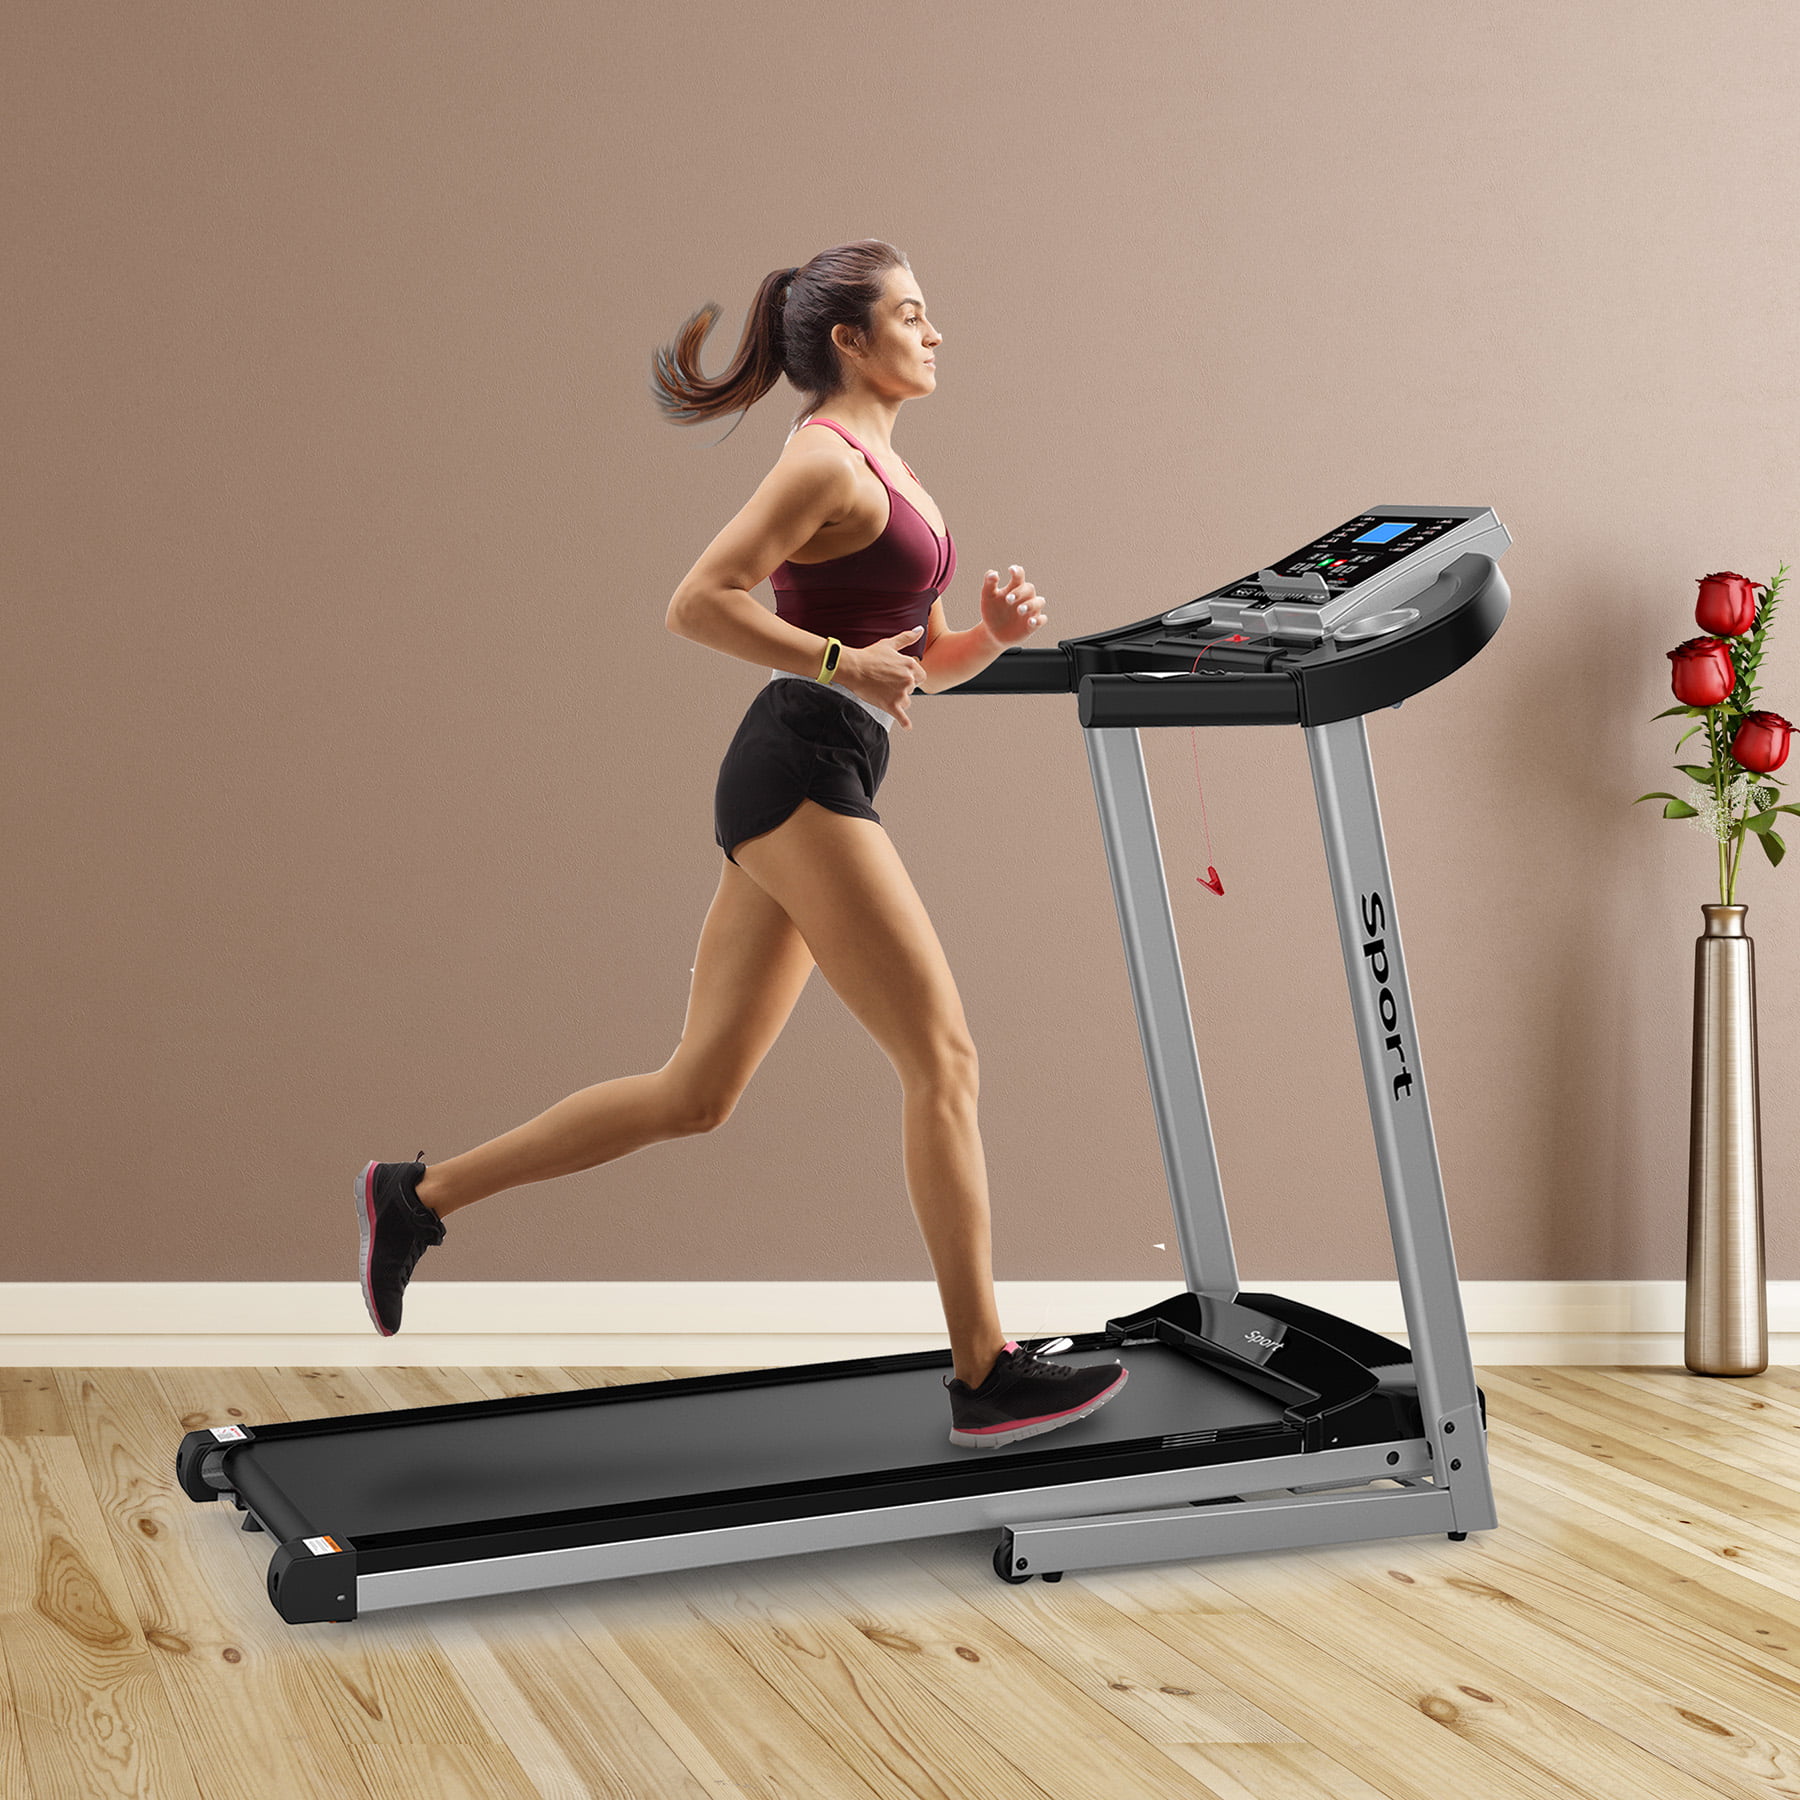 Portable Compact Treadmill with 12 Pre-Set Programs and 16.5 Inch Wide Tread Belt,265 LB Max Weight 2.25HP Folding Treadmill with Large Desk and Bluetooth Speaker FUNMILY Folding Treadmill 